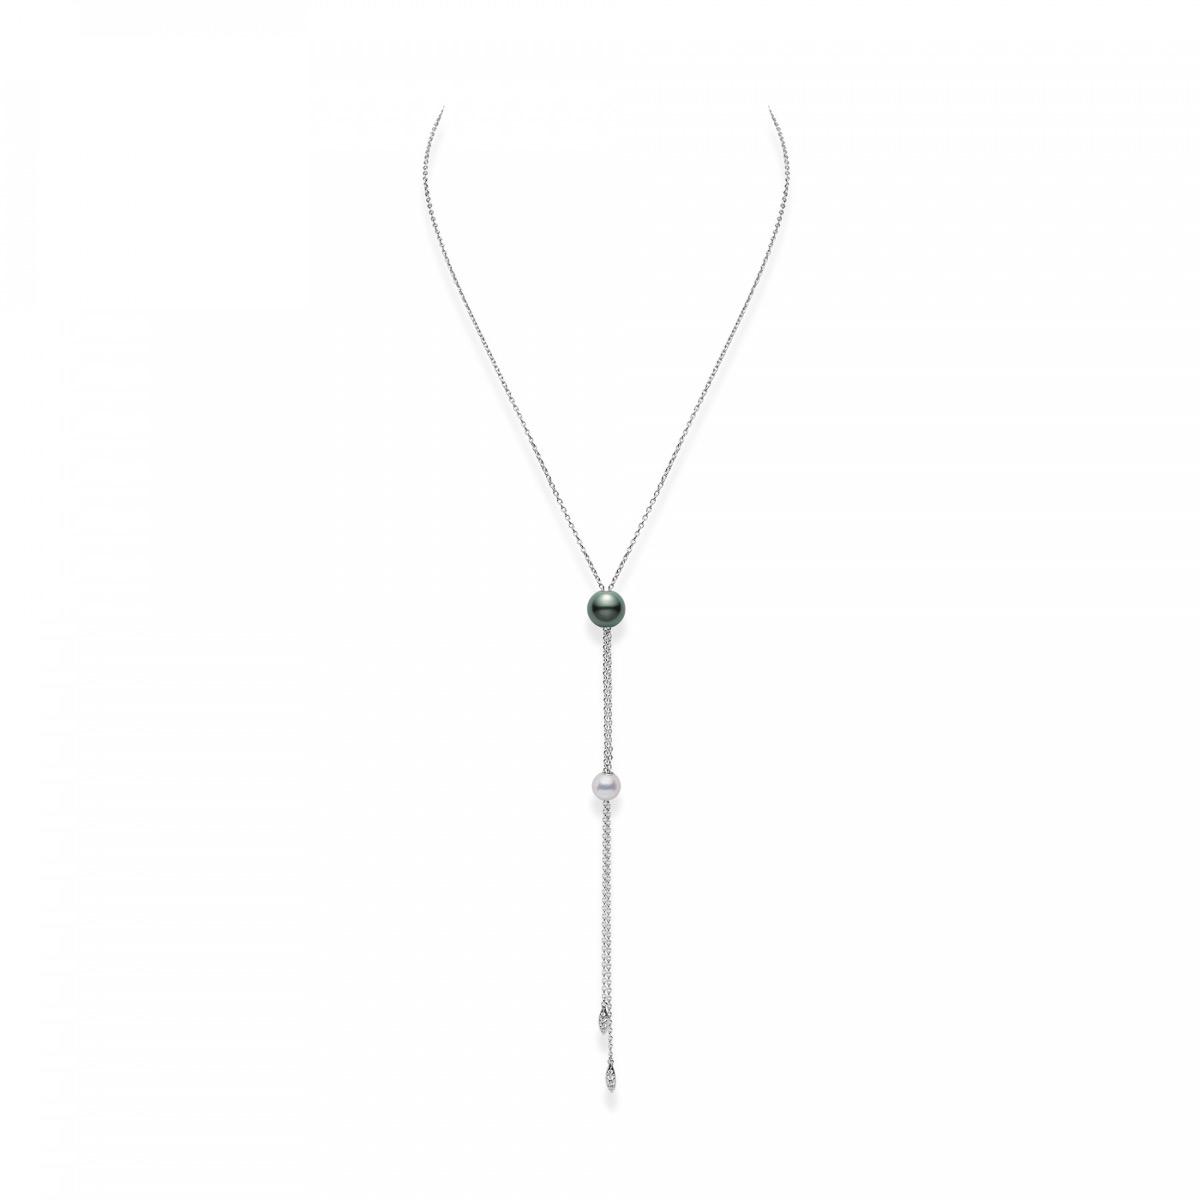 Mikimoto Pearls in Motion Akoya and Black South Sea Cultured Pearl Pendant in 18K White Gold